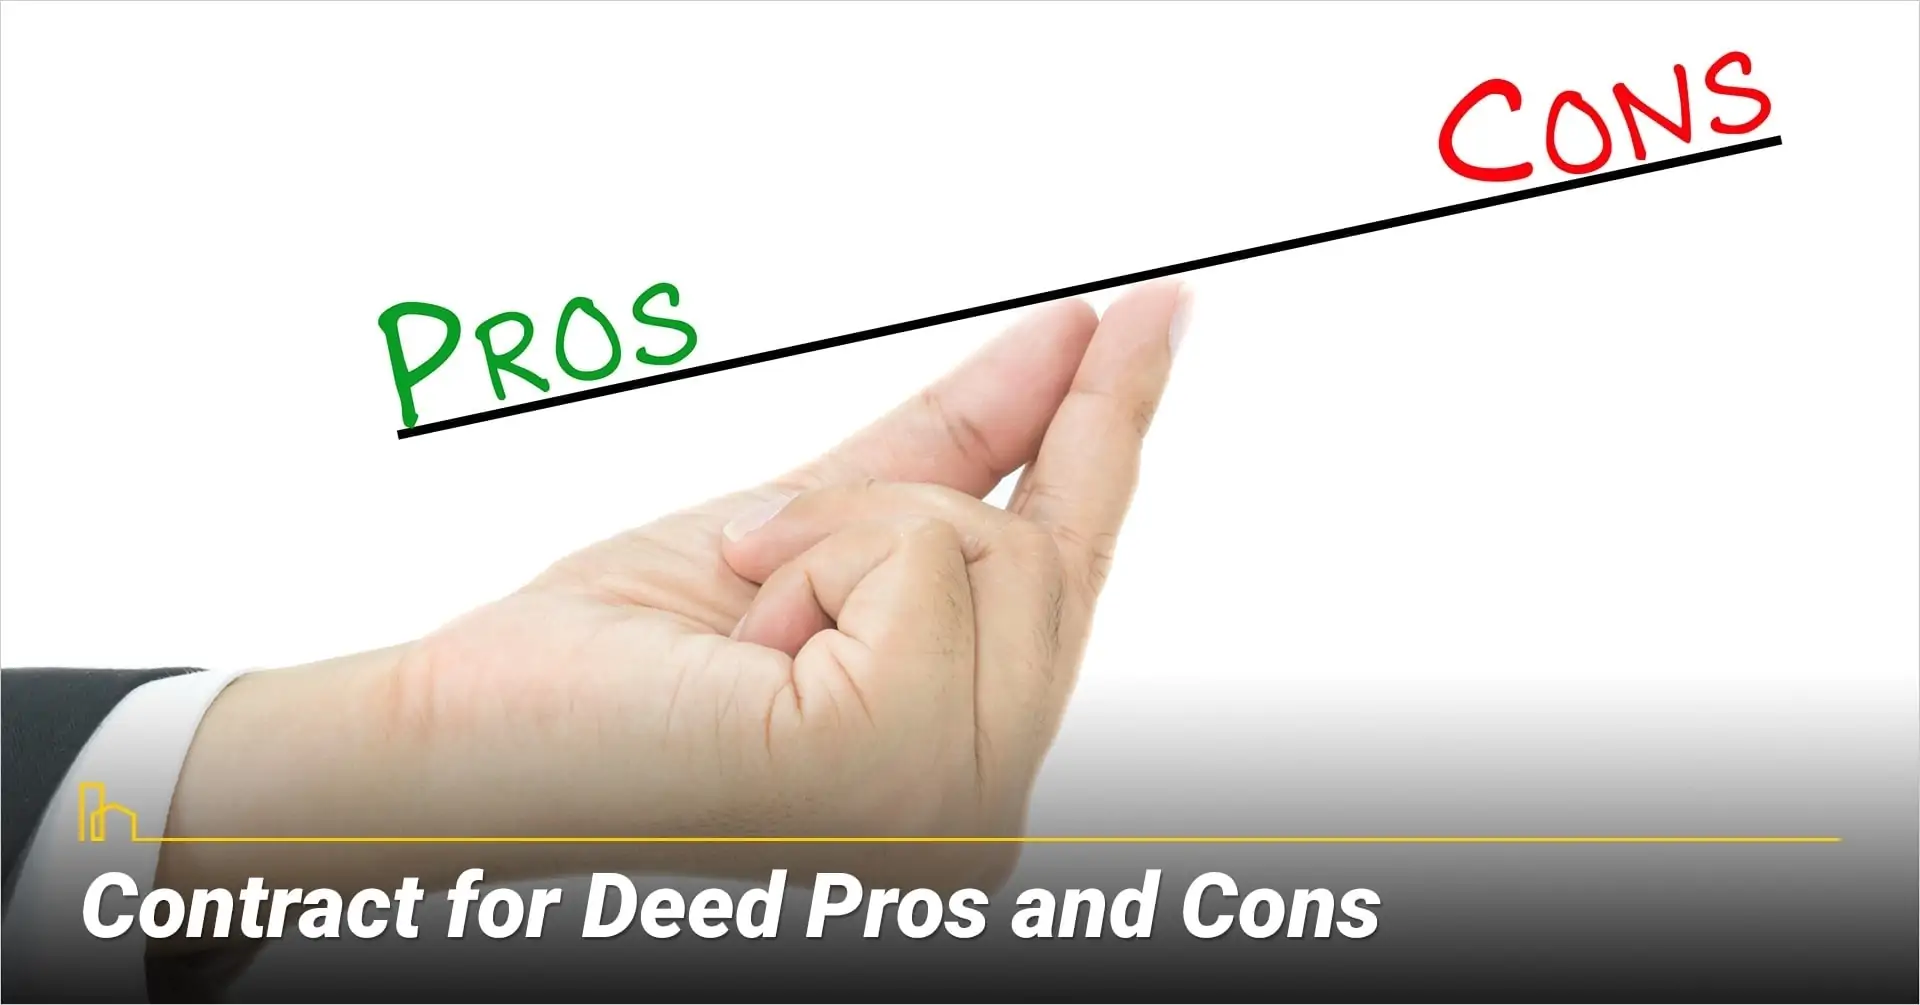 Contract for Deed Pros and Cons, pluses and minuses of a Contract for Deed